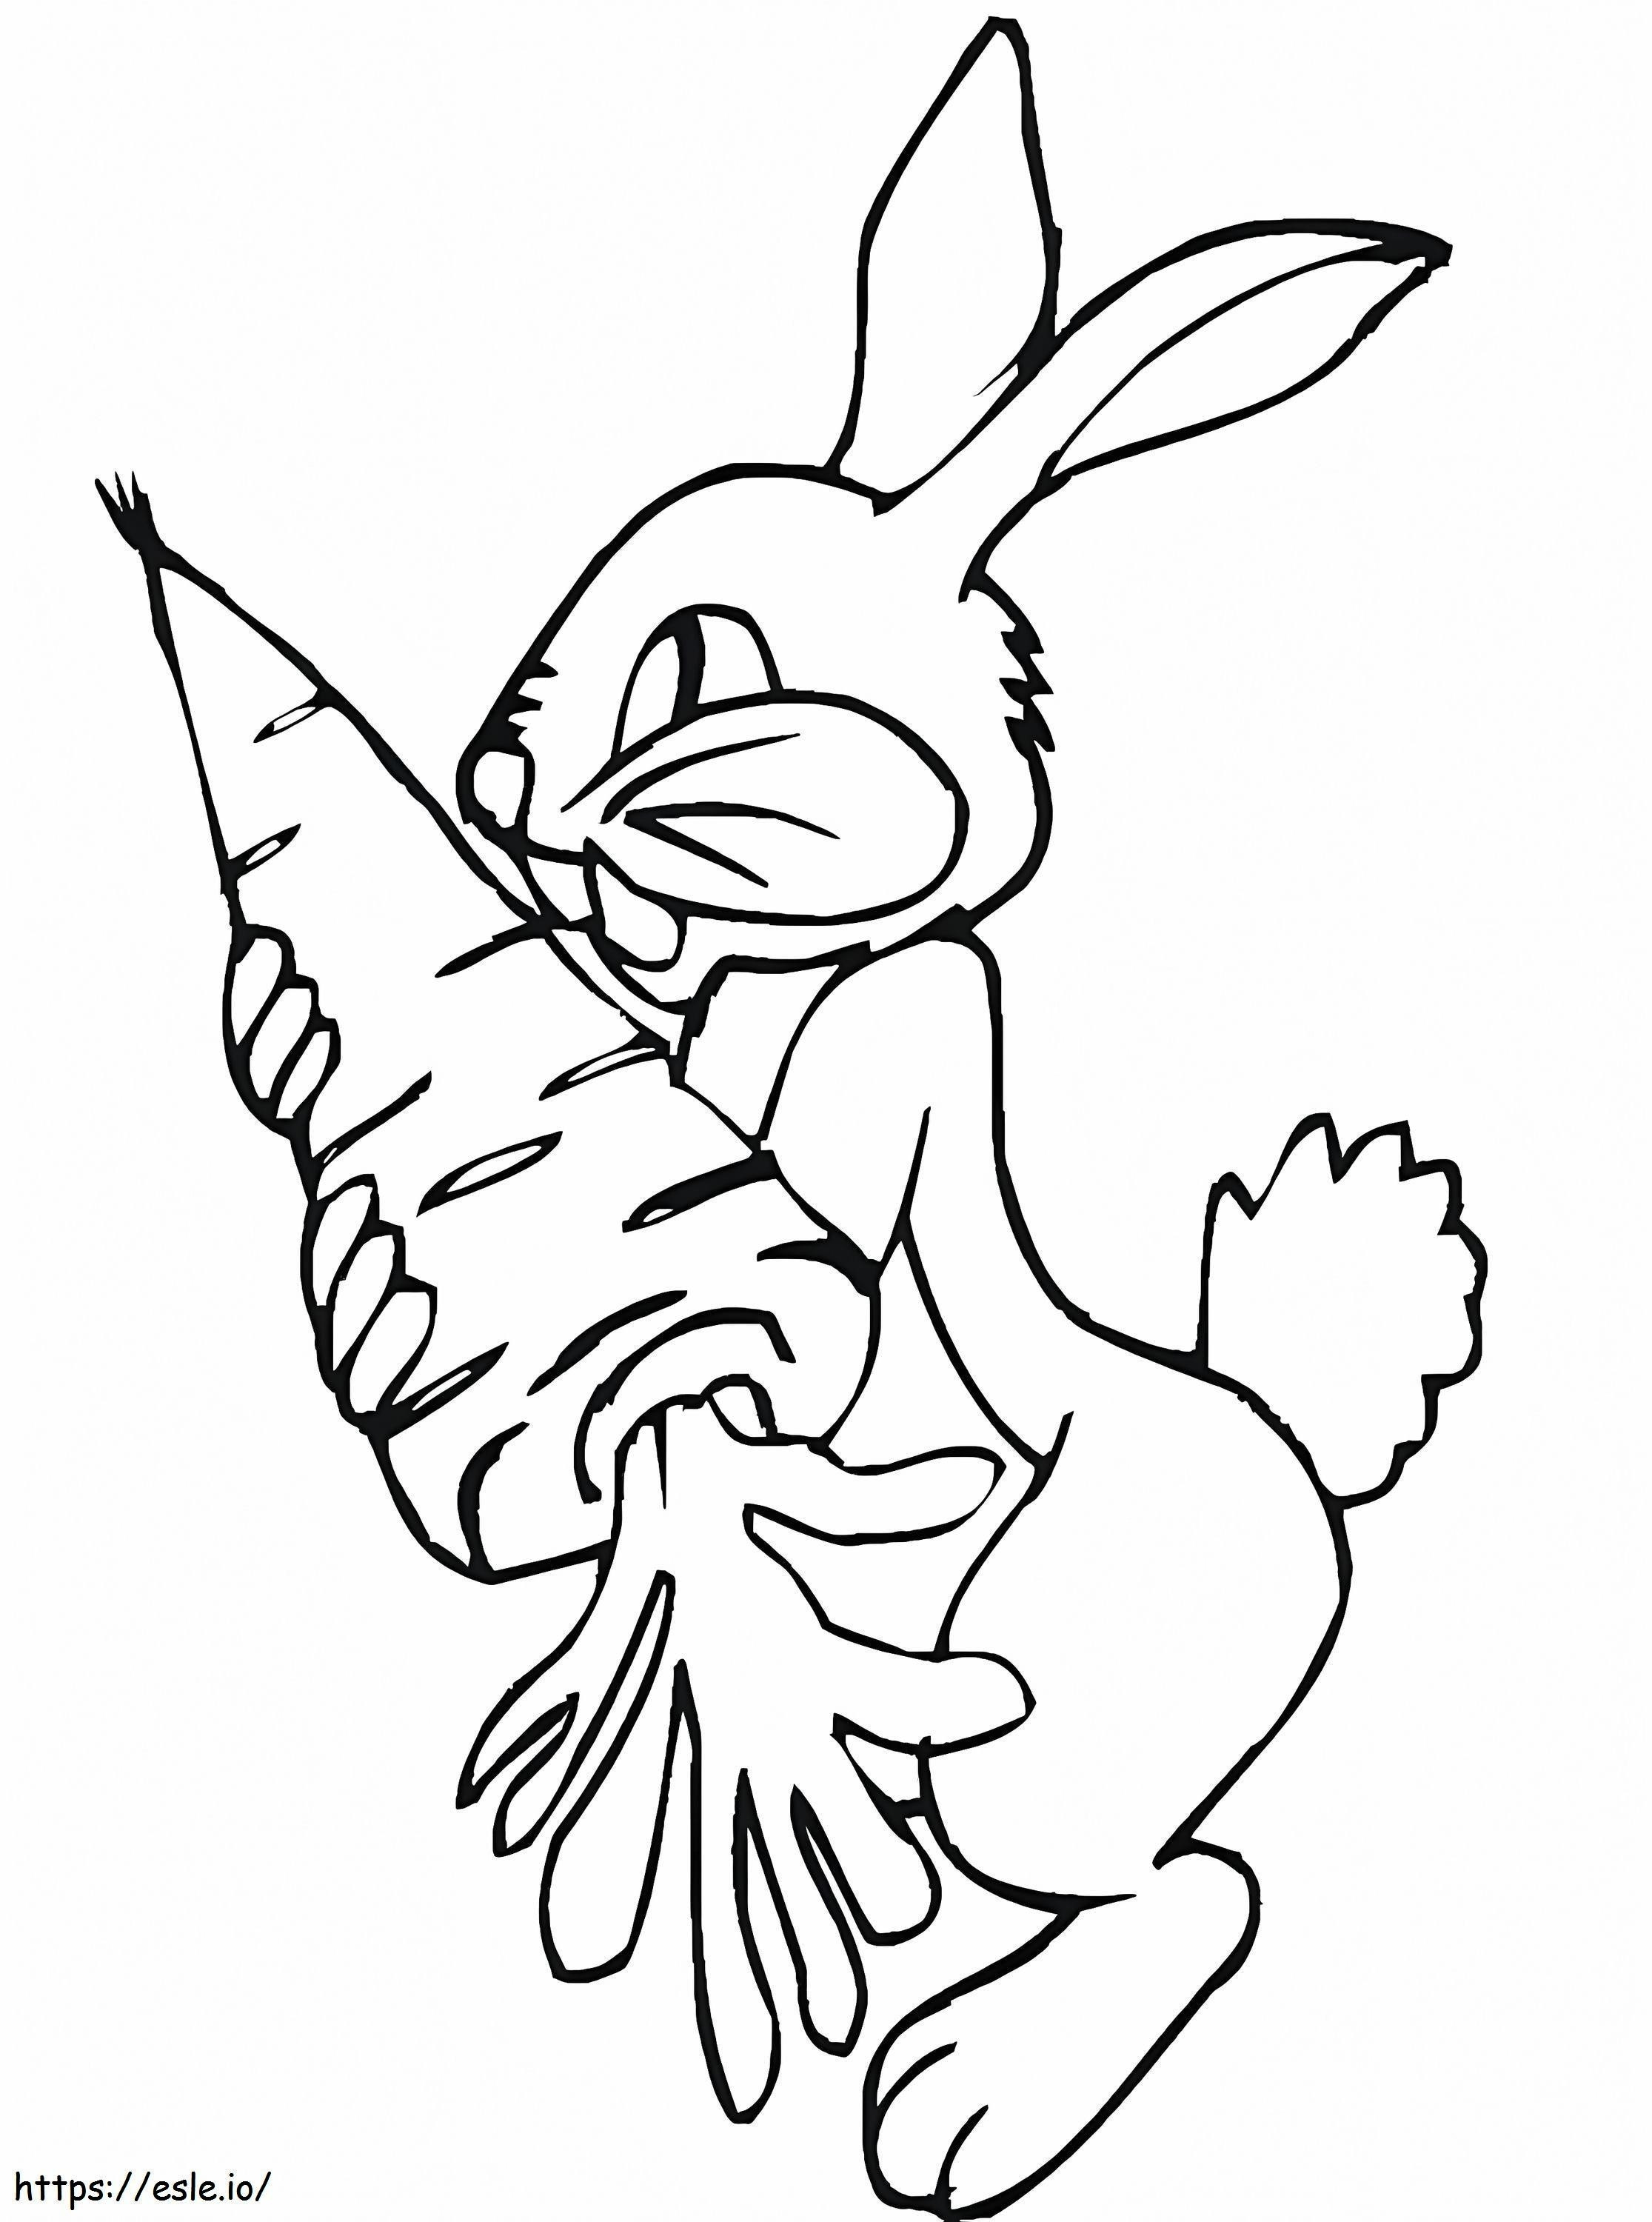 Rabbit With A Big Carrot coloring page